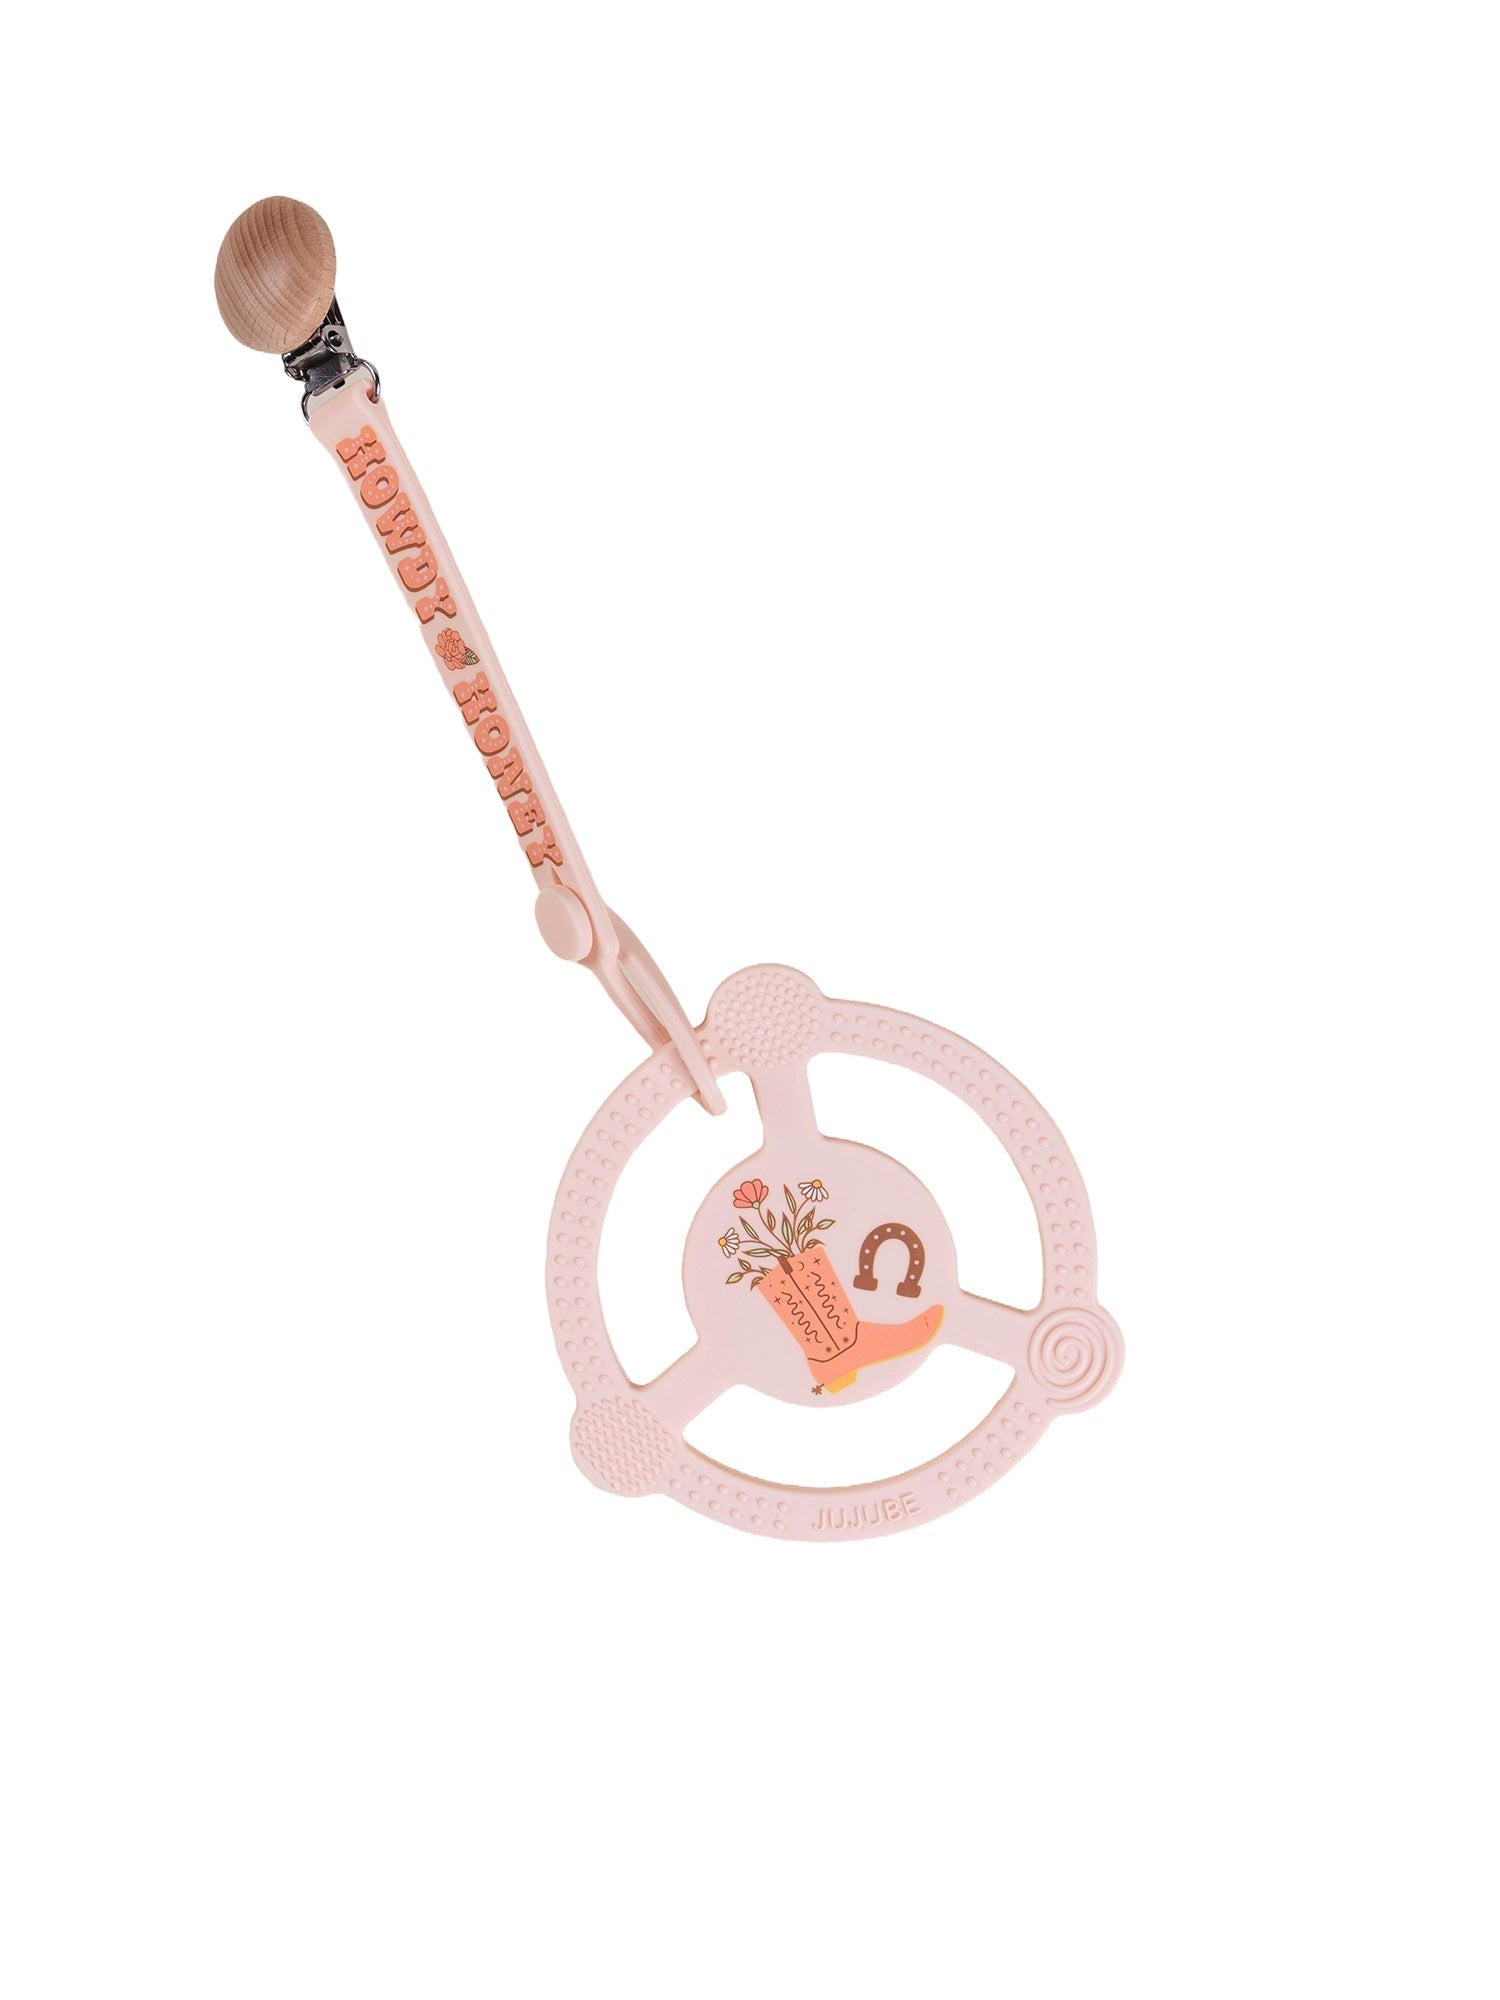 Silicone Teether Ring - Bloomin' Boot